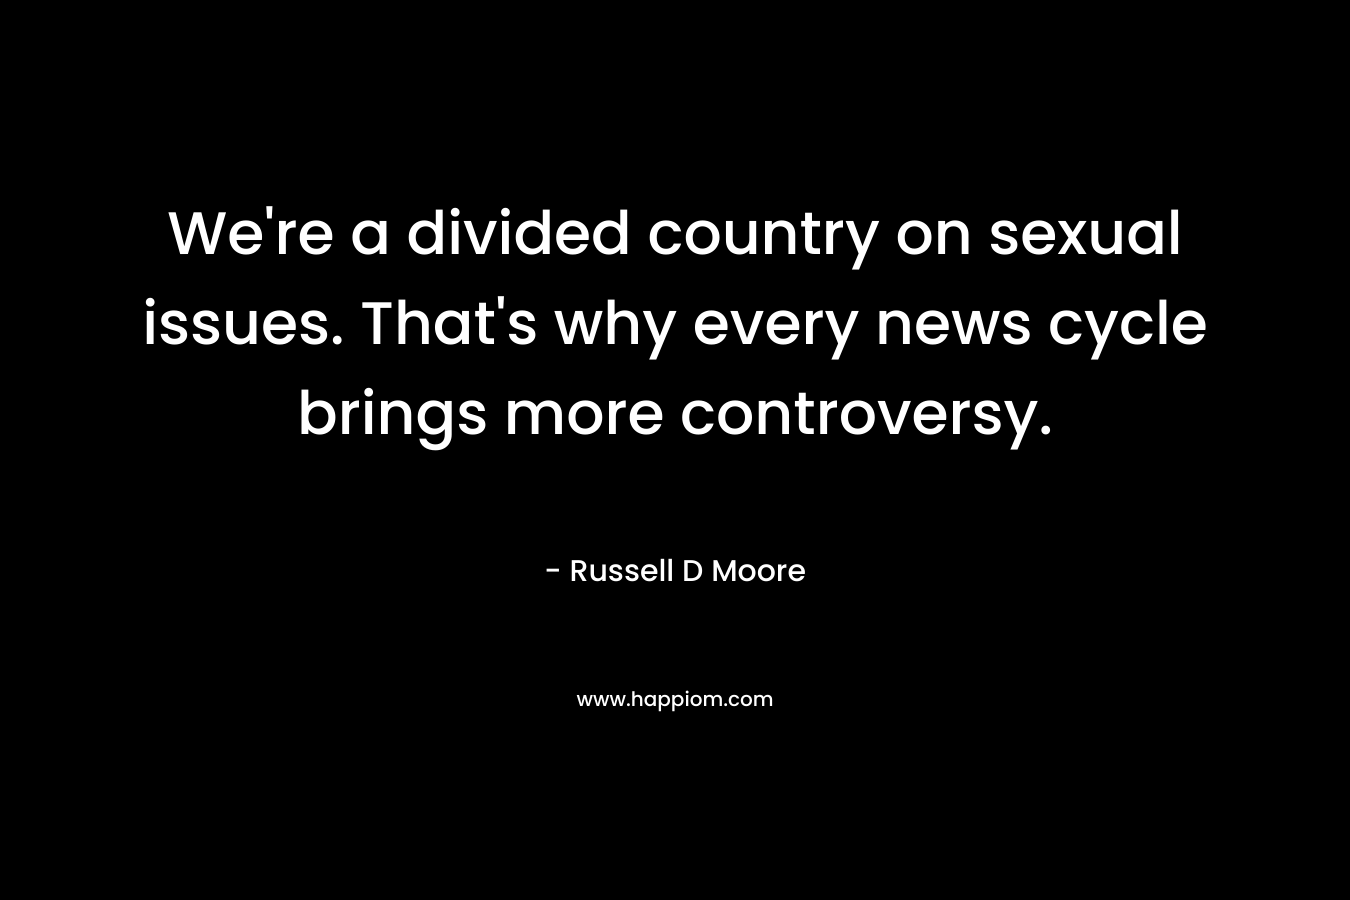 We’re a divided country on sexual issues. That’s why every news cycle brings more controversy. – Russell D Moore